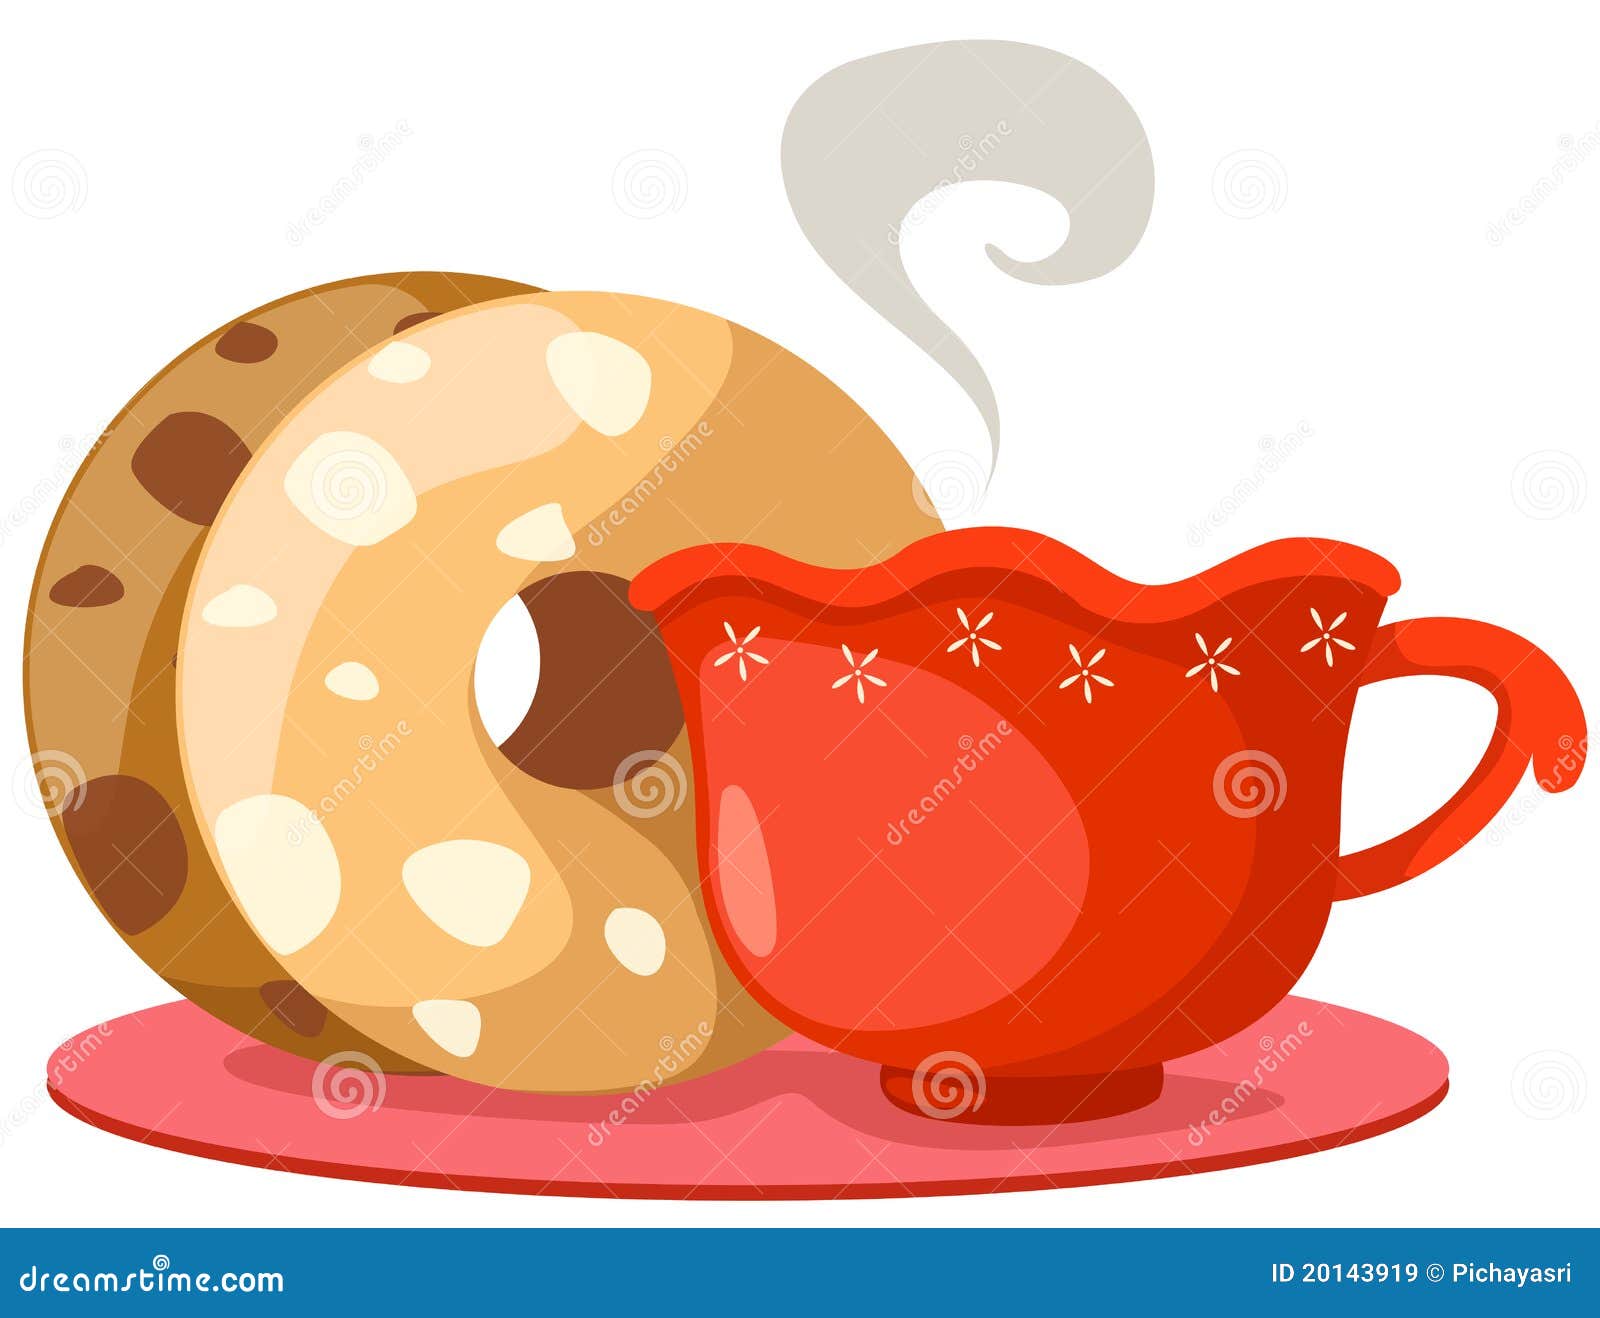 clipart coffee and doughnuts - photo #46